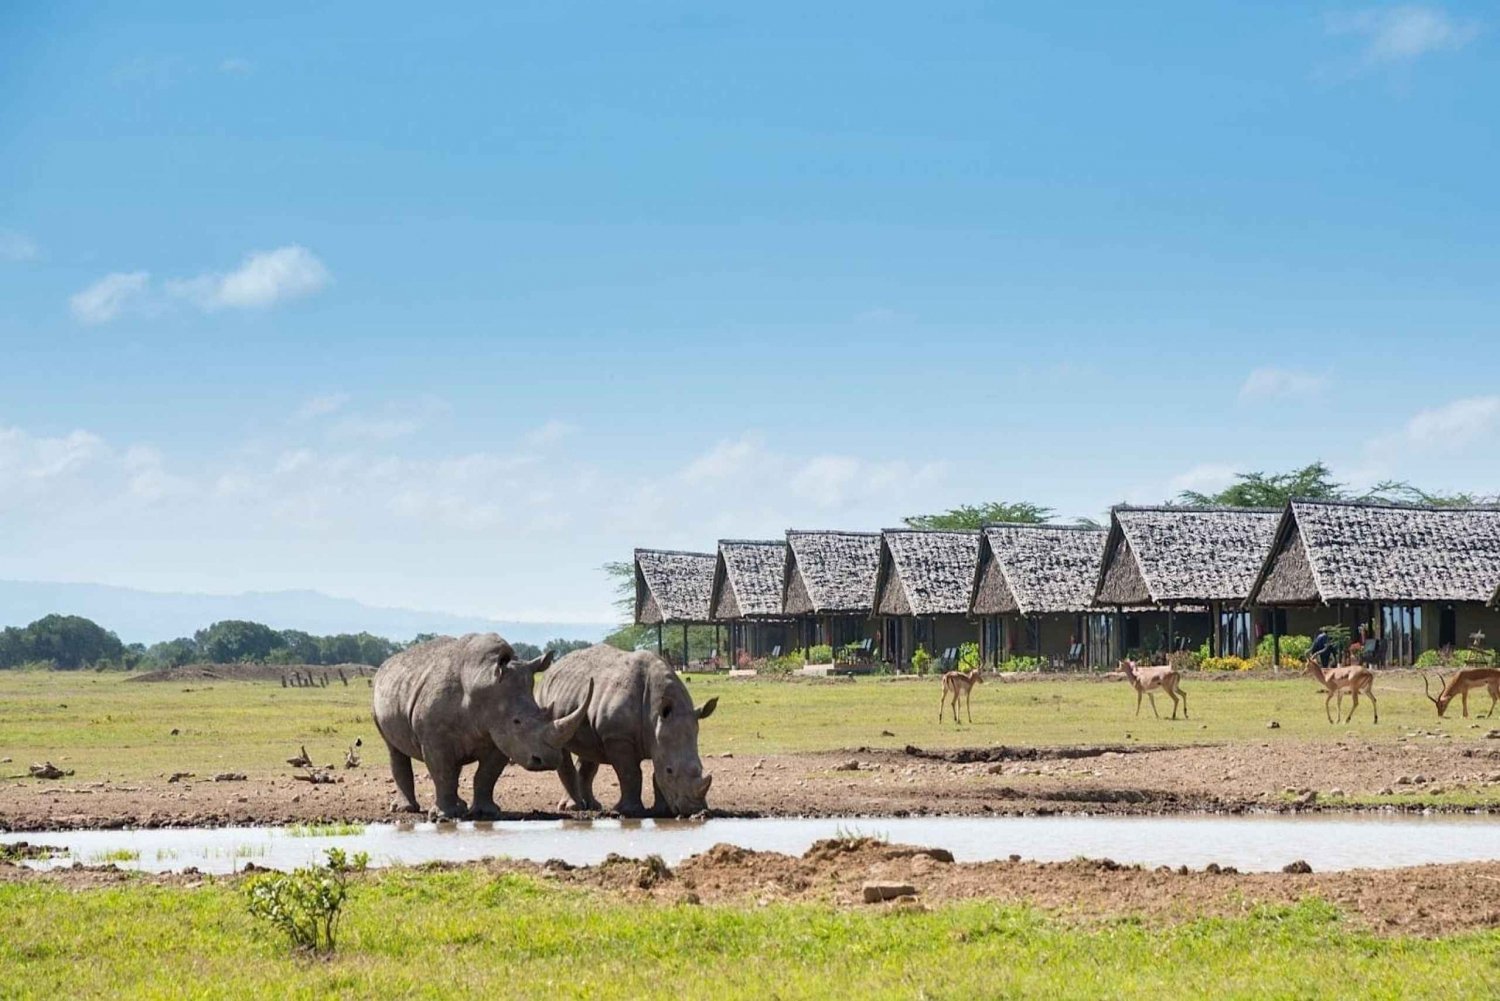 Guided Day Tour To Ol Pejeta Conservancy From Nairobi